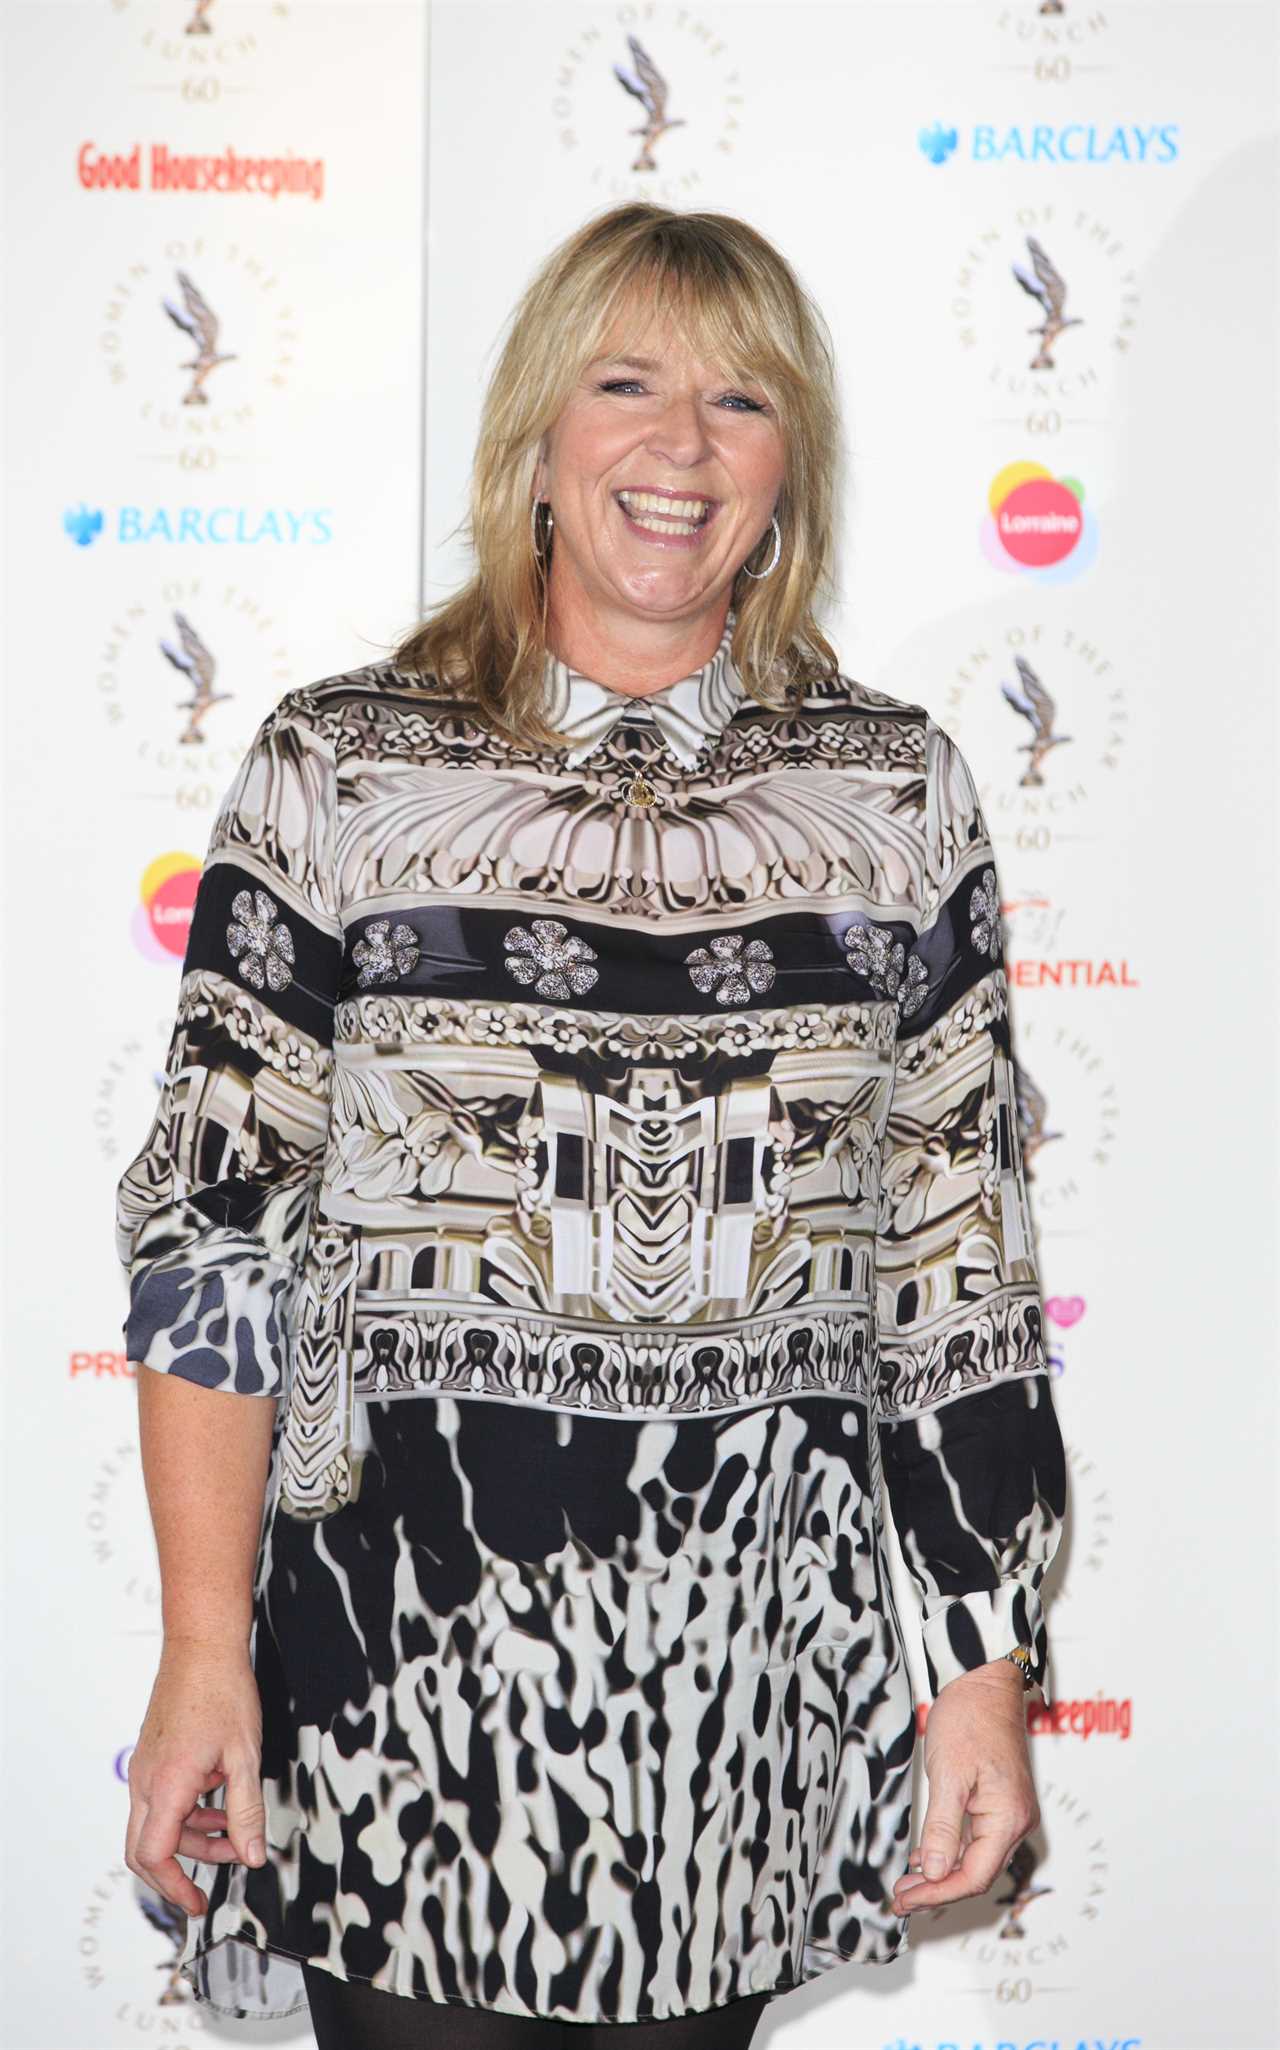 Fern Britton breaks her silence after Phillip Schofield’s emotional interview about This Morning affair